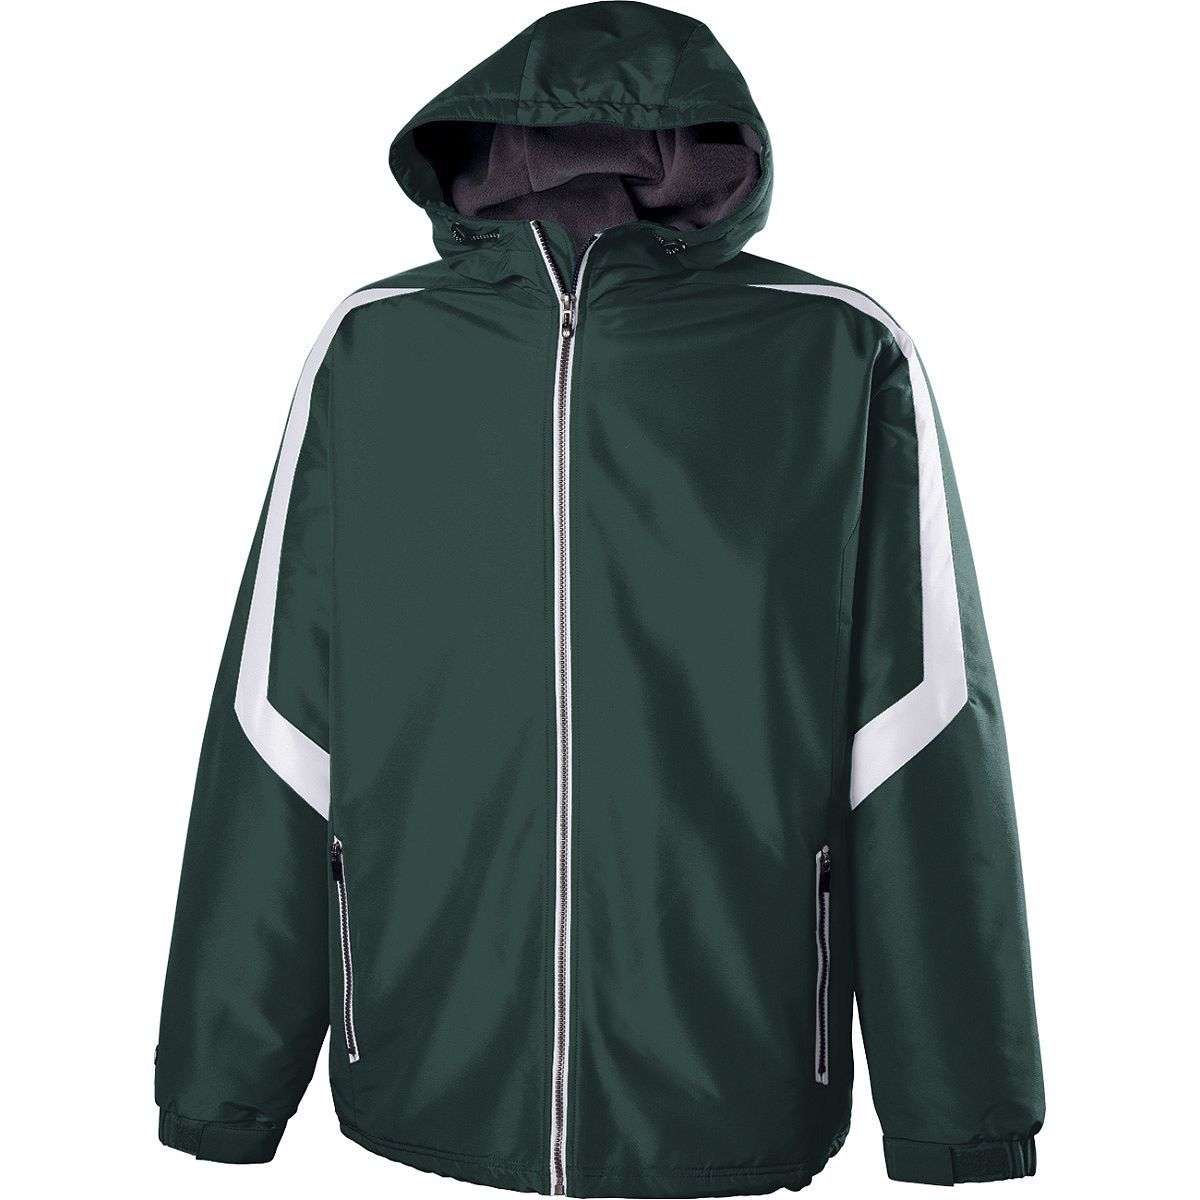 Selected Color is Dark Green/White